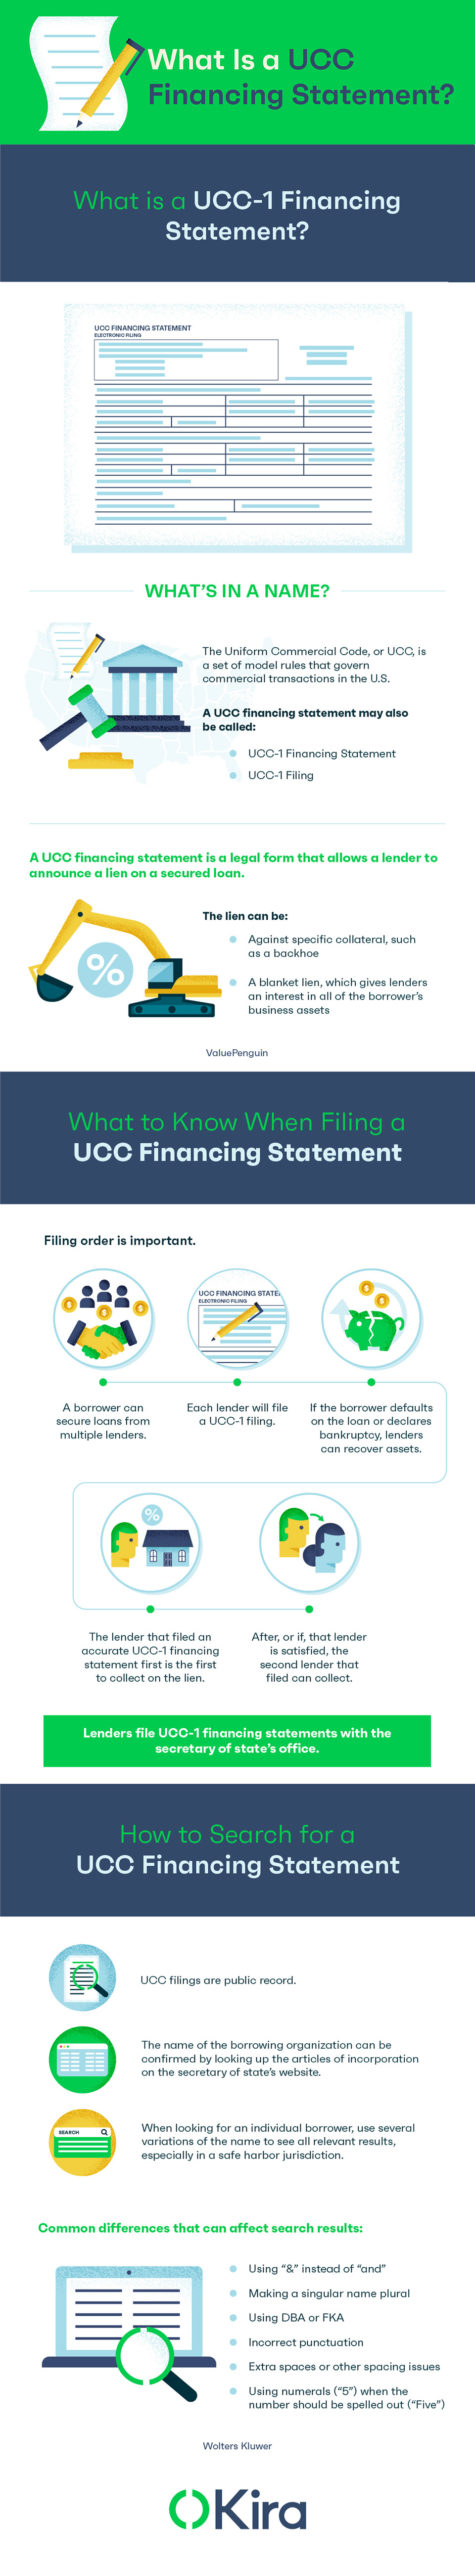 ucc financing statement infographic